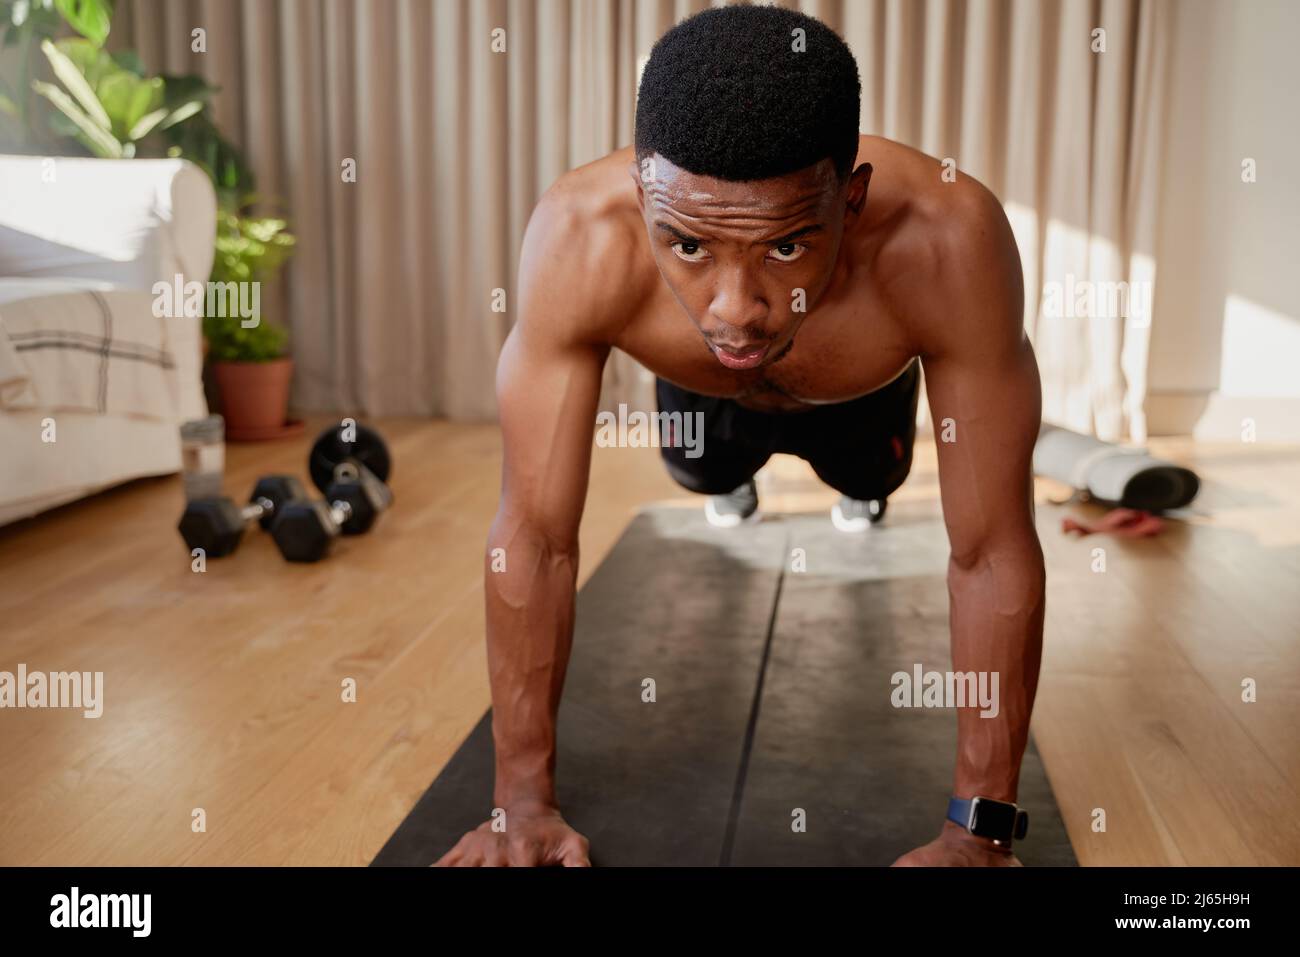 African American young male holding high plank in his warm lit living room, working out at home, about to do a push up Stock Photo